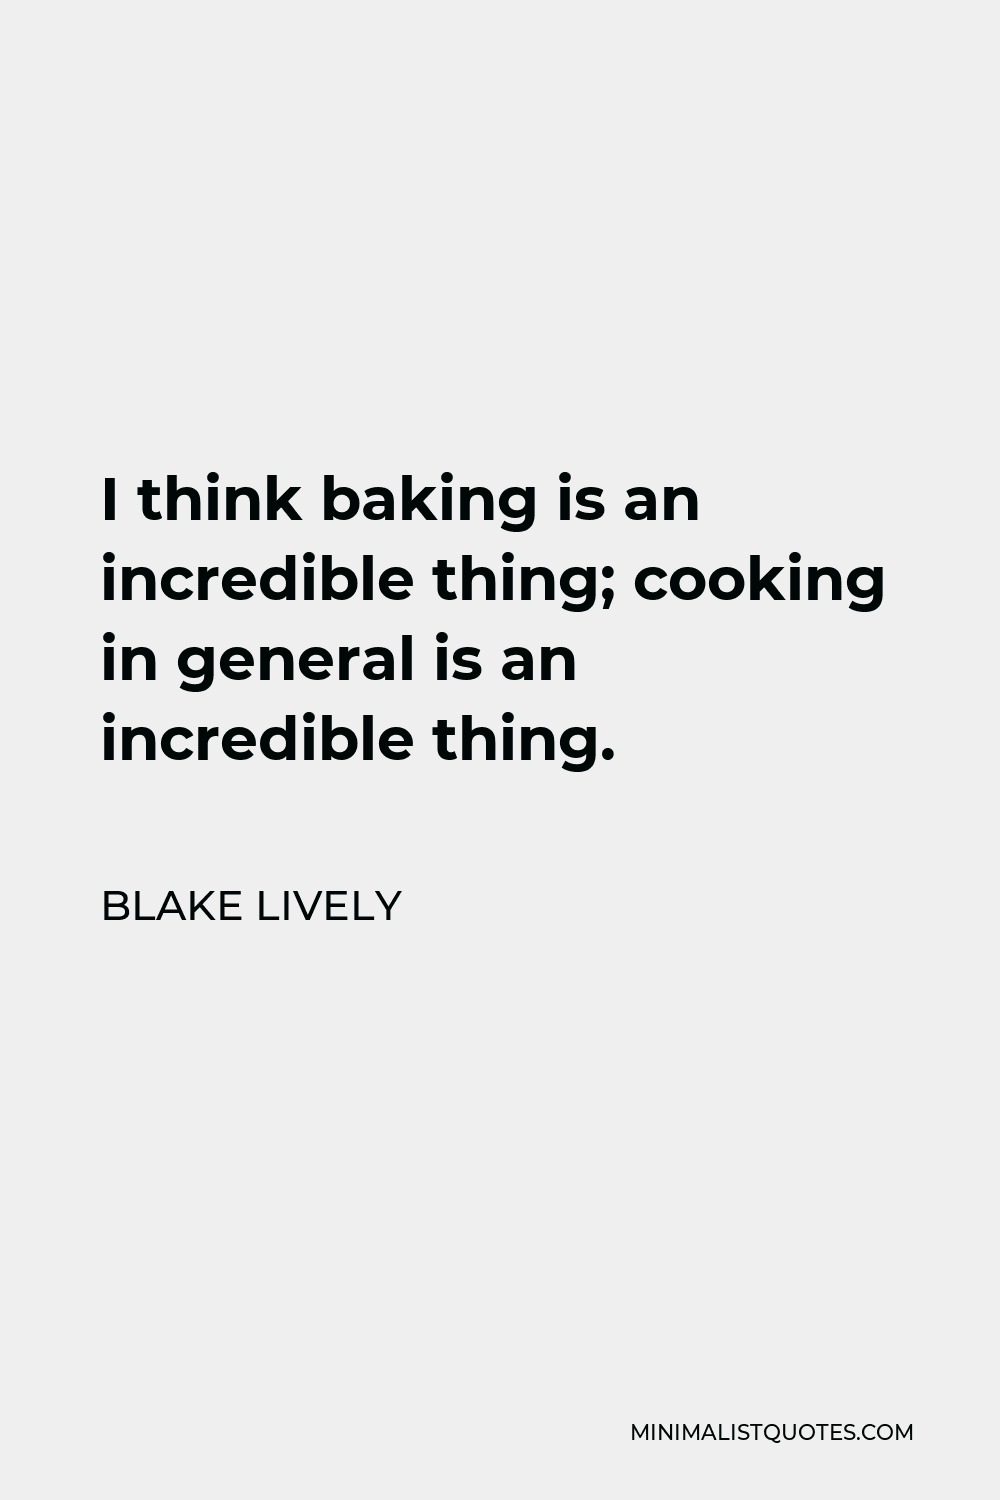 Blake Lively Quote - I think baking is an incredible thing; cooking in general is an incredible thing.